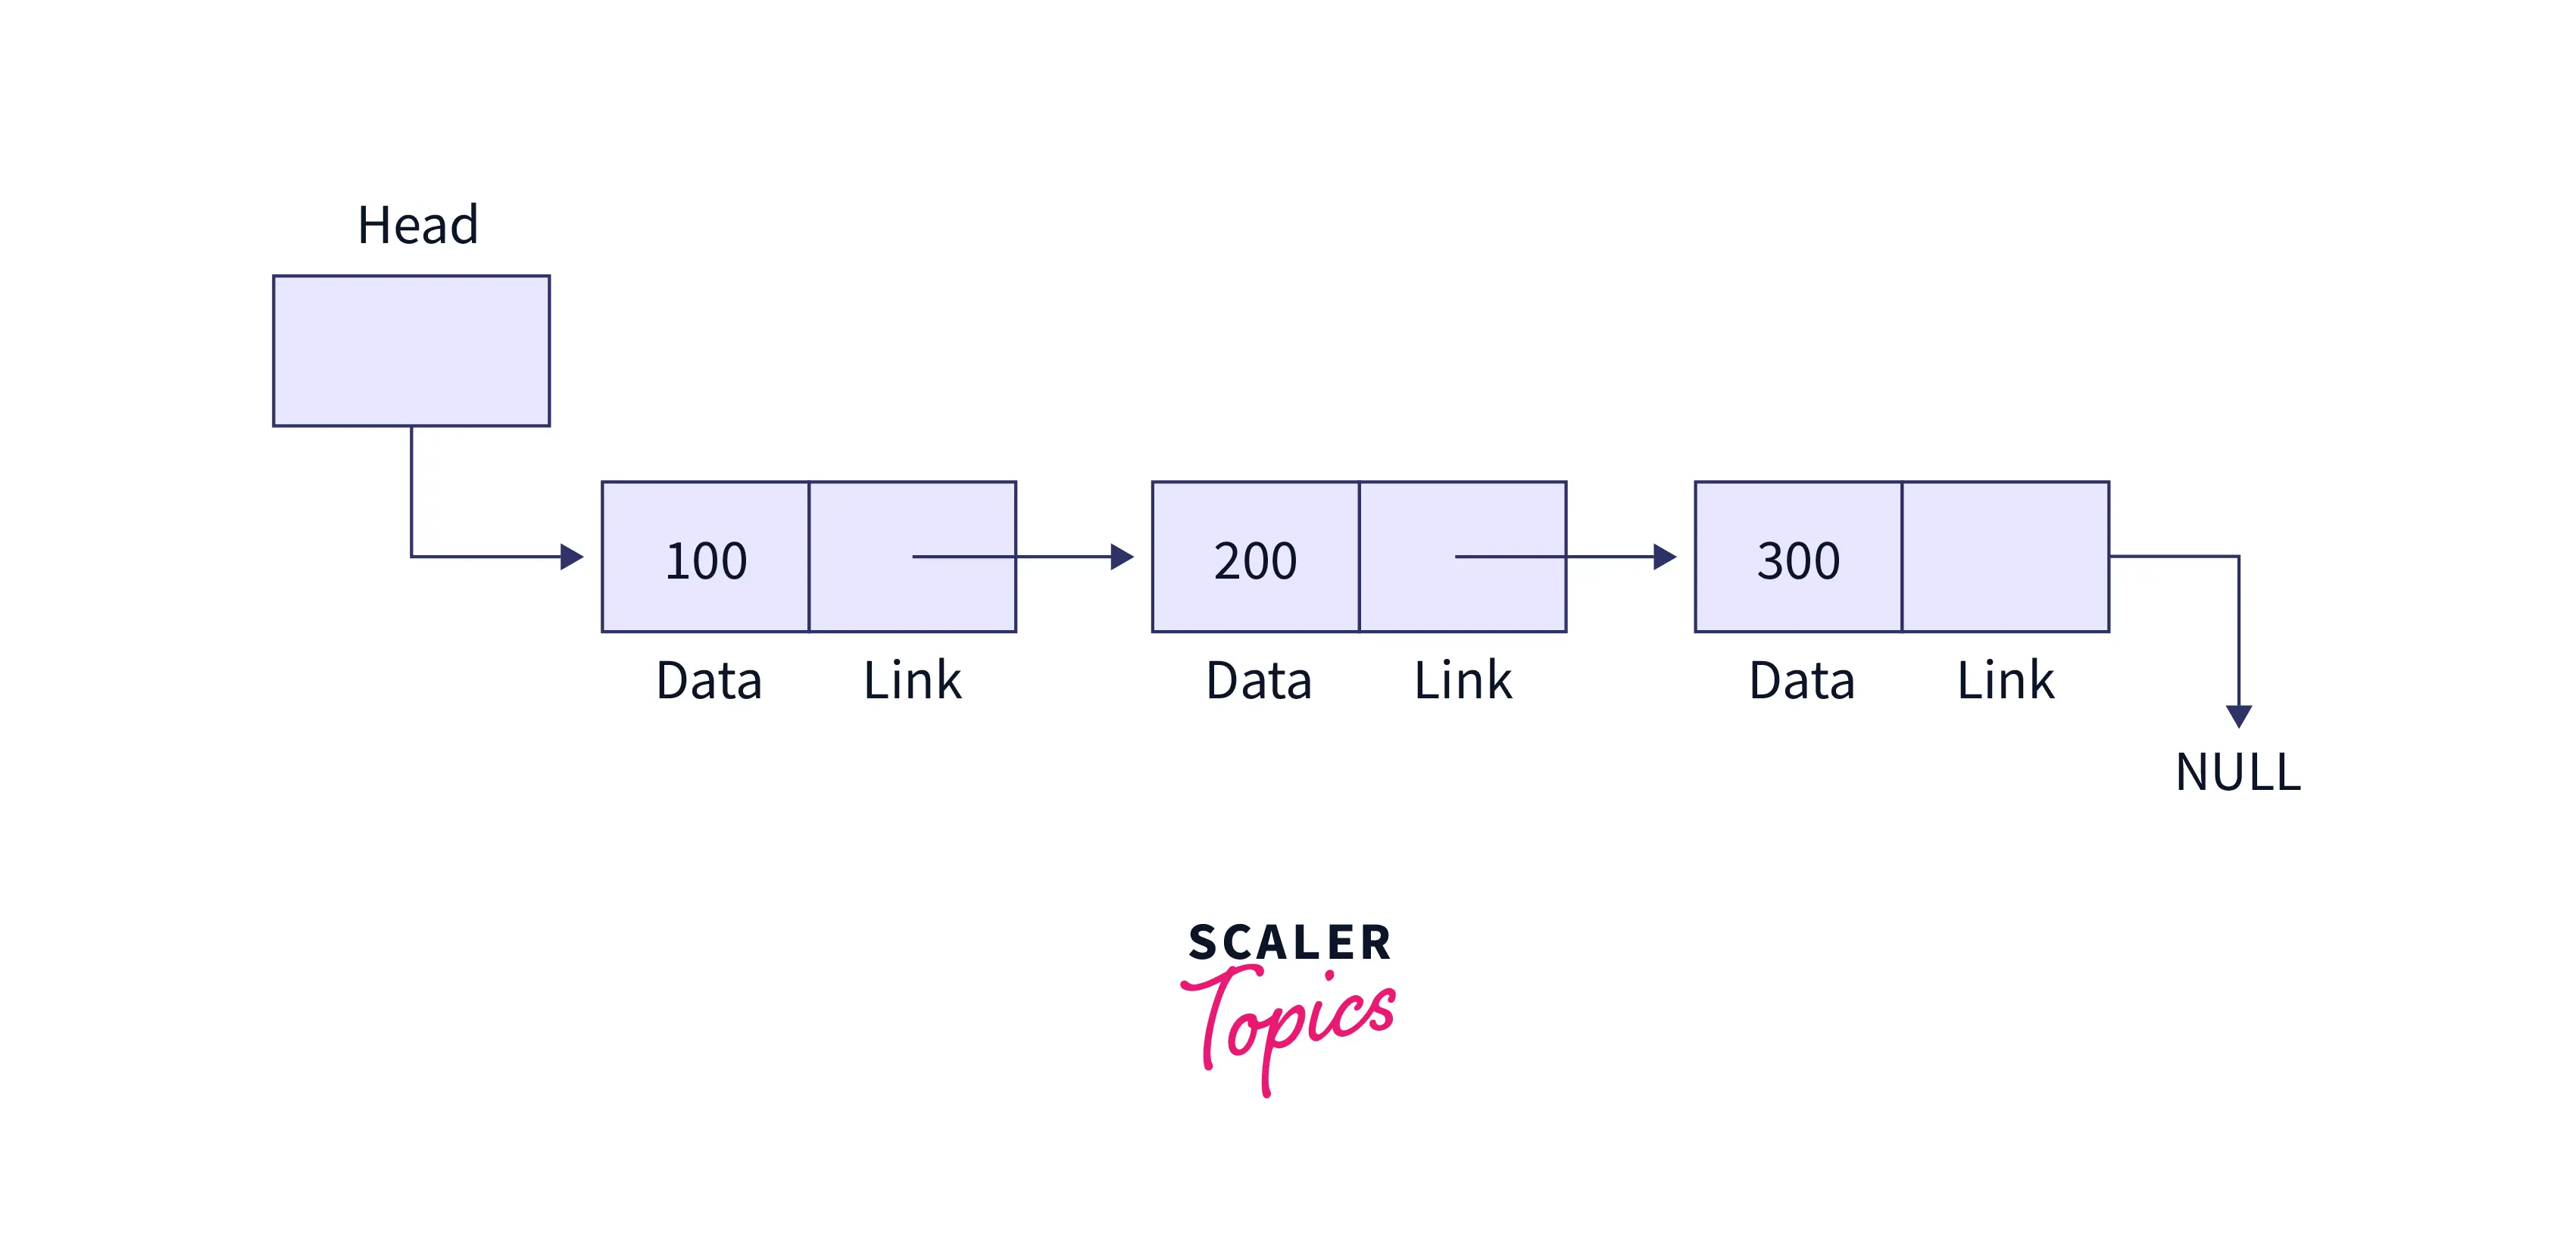 NULL POINTER USES IN LINKED-LIST